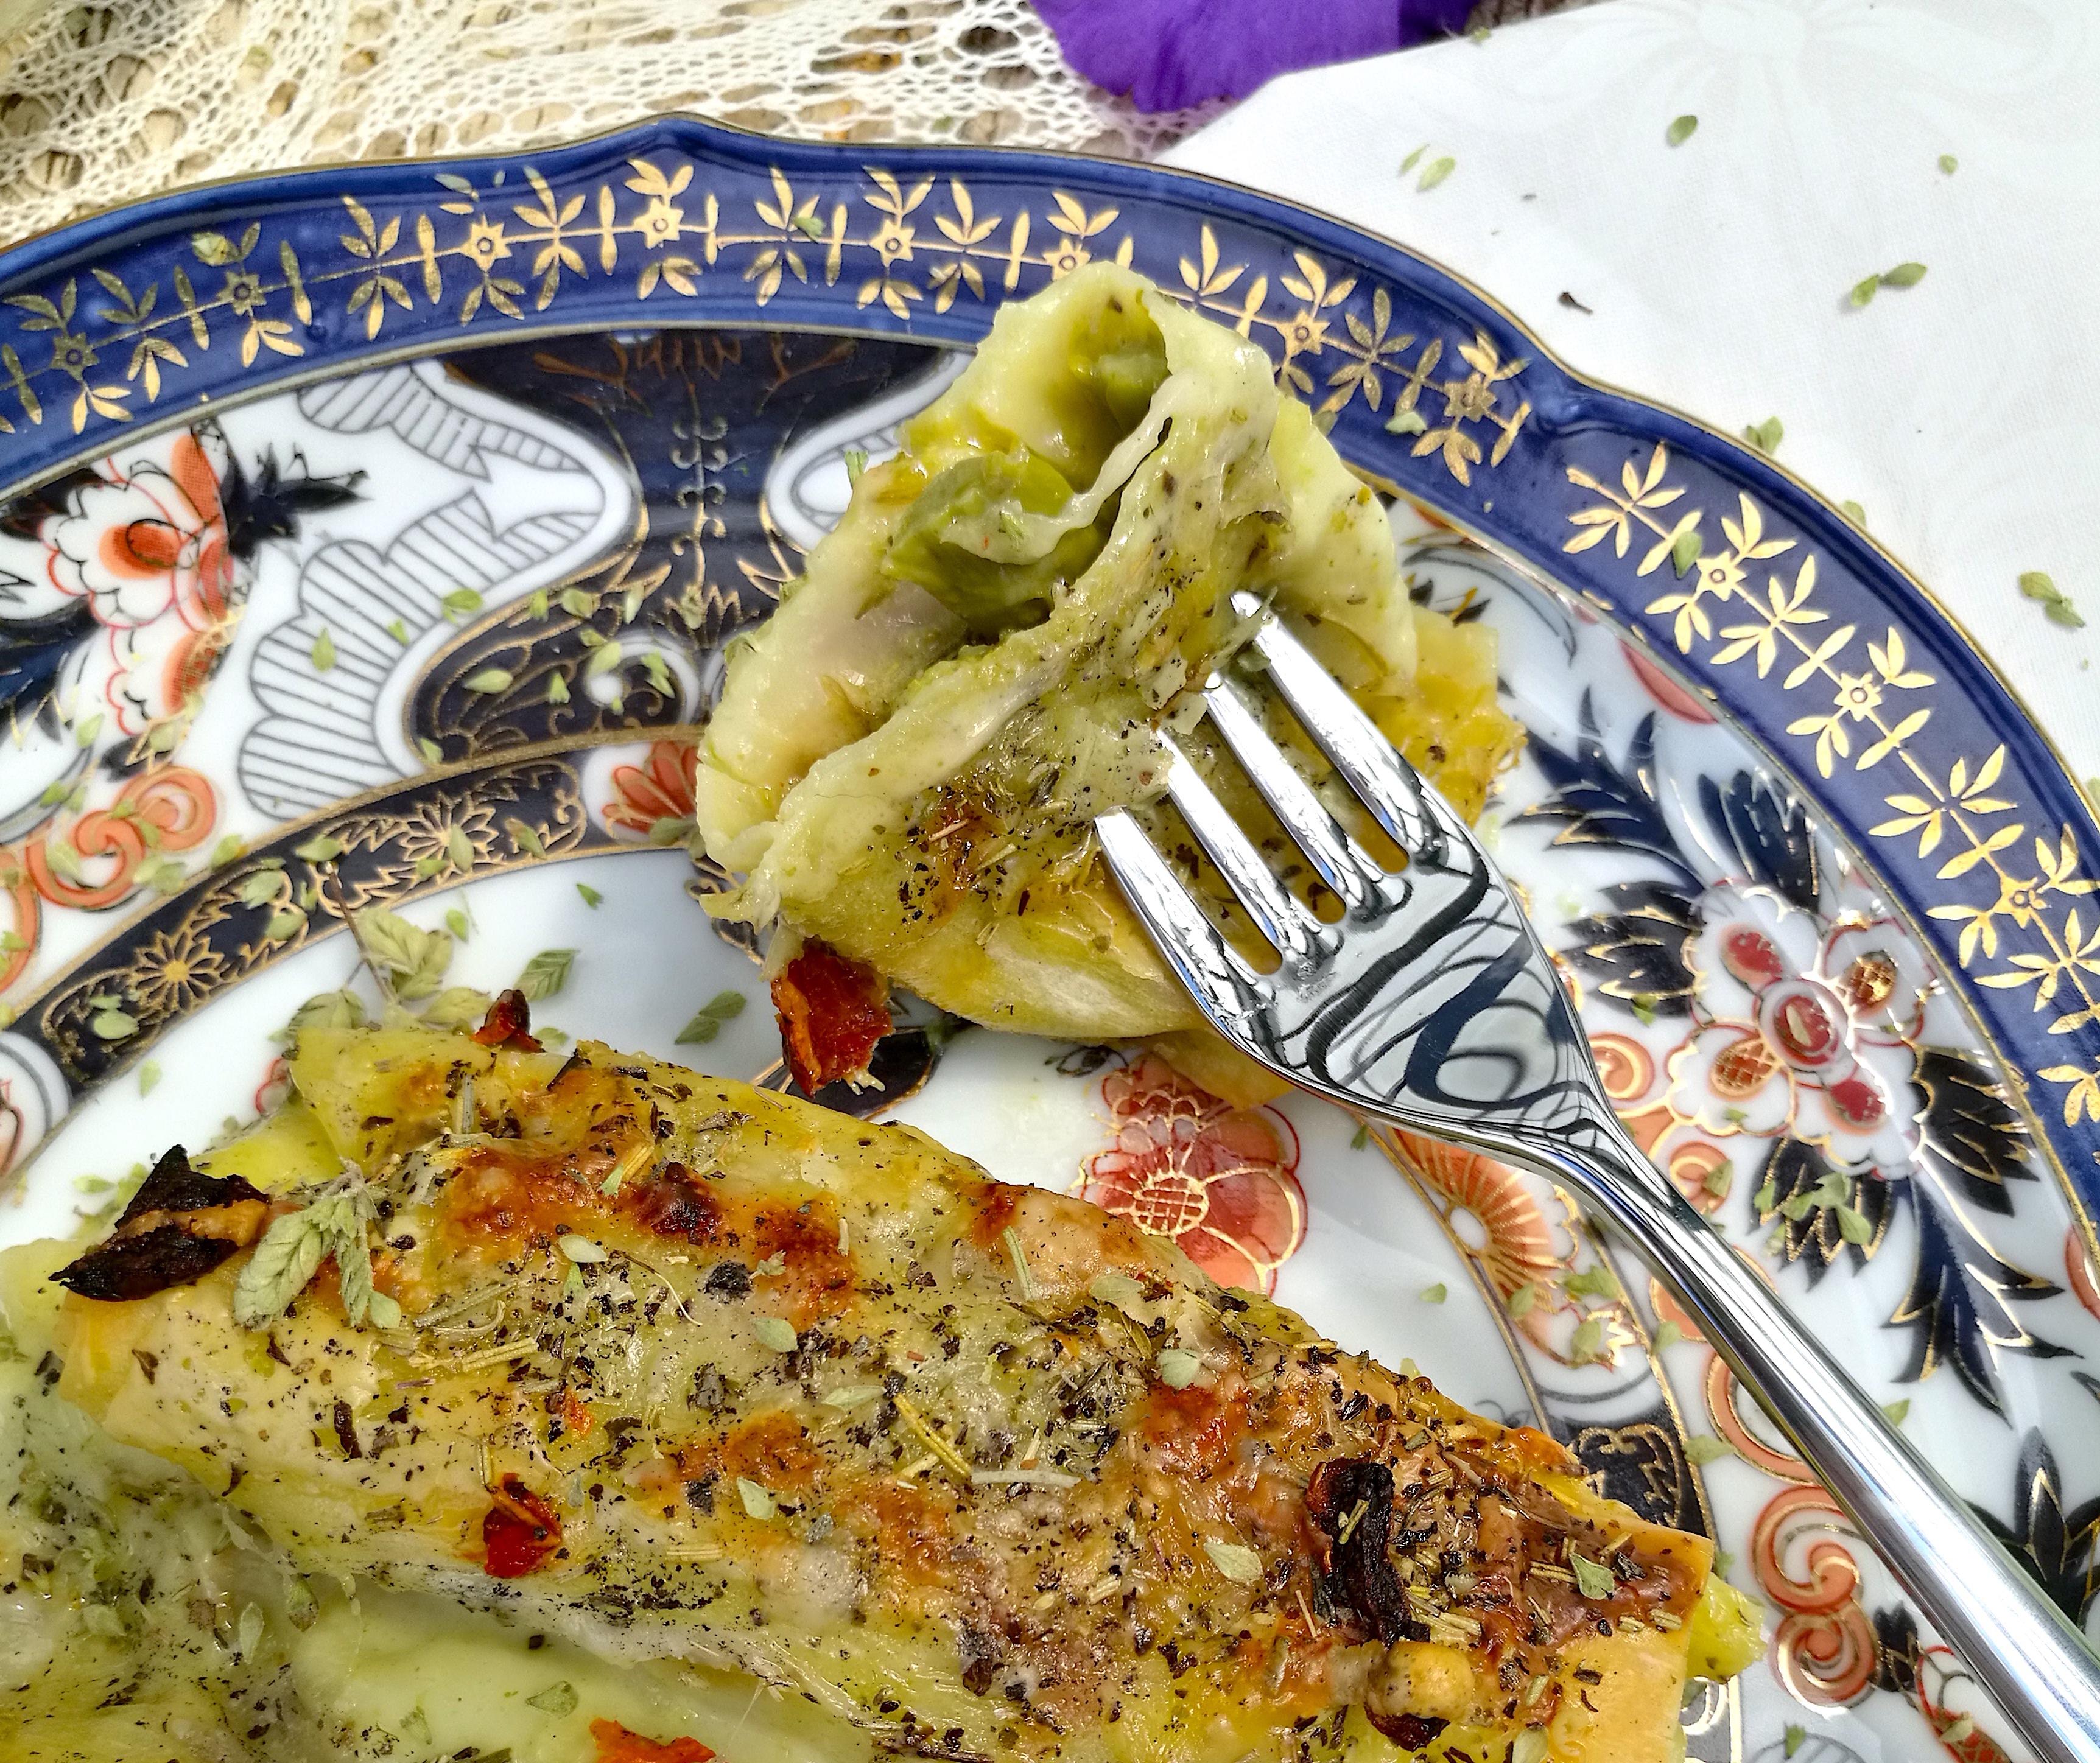 #worldpestoday: Fresh pesto cannelloni with vegetables and dried tomatoes